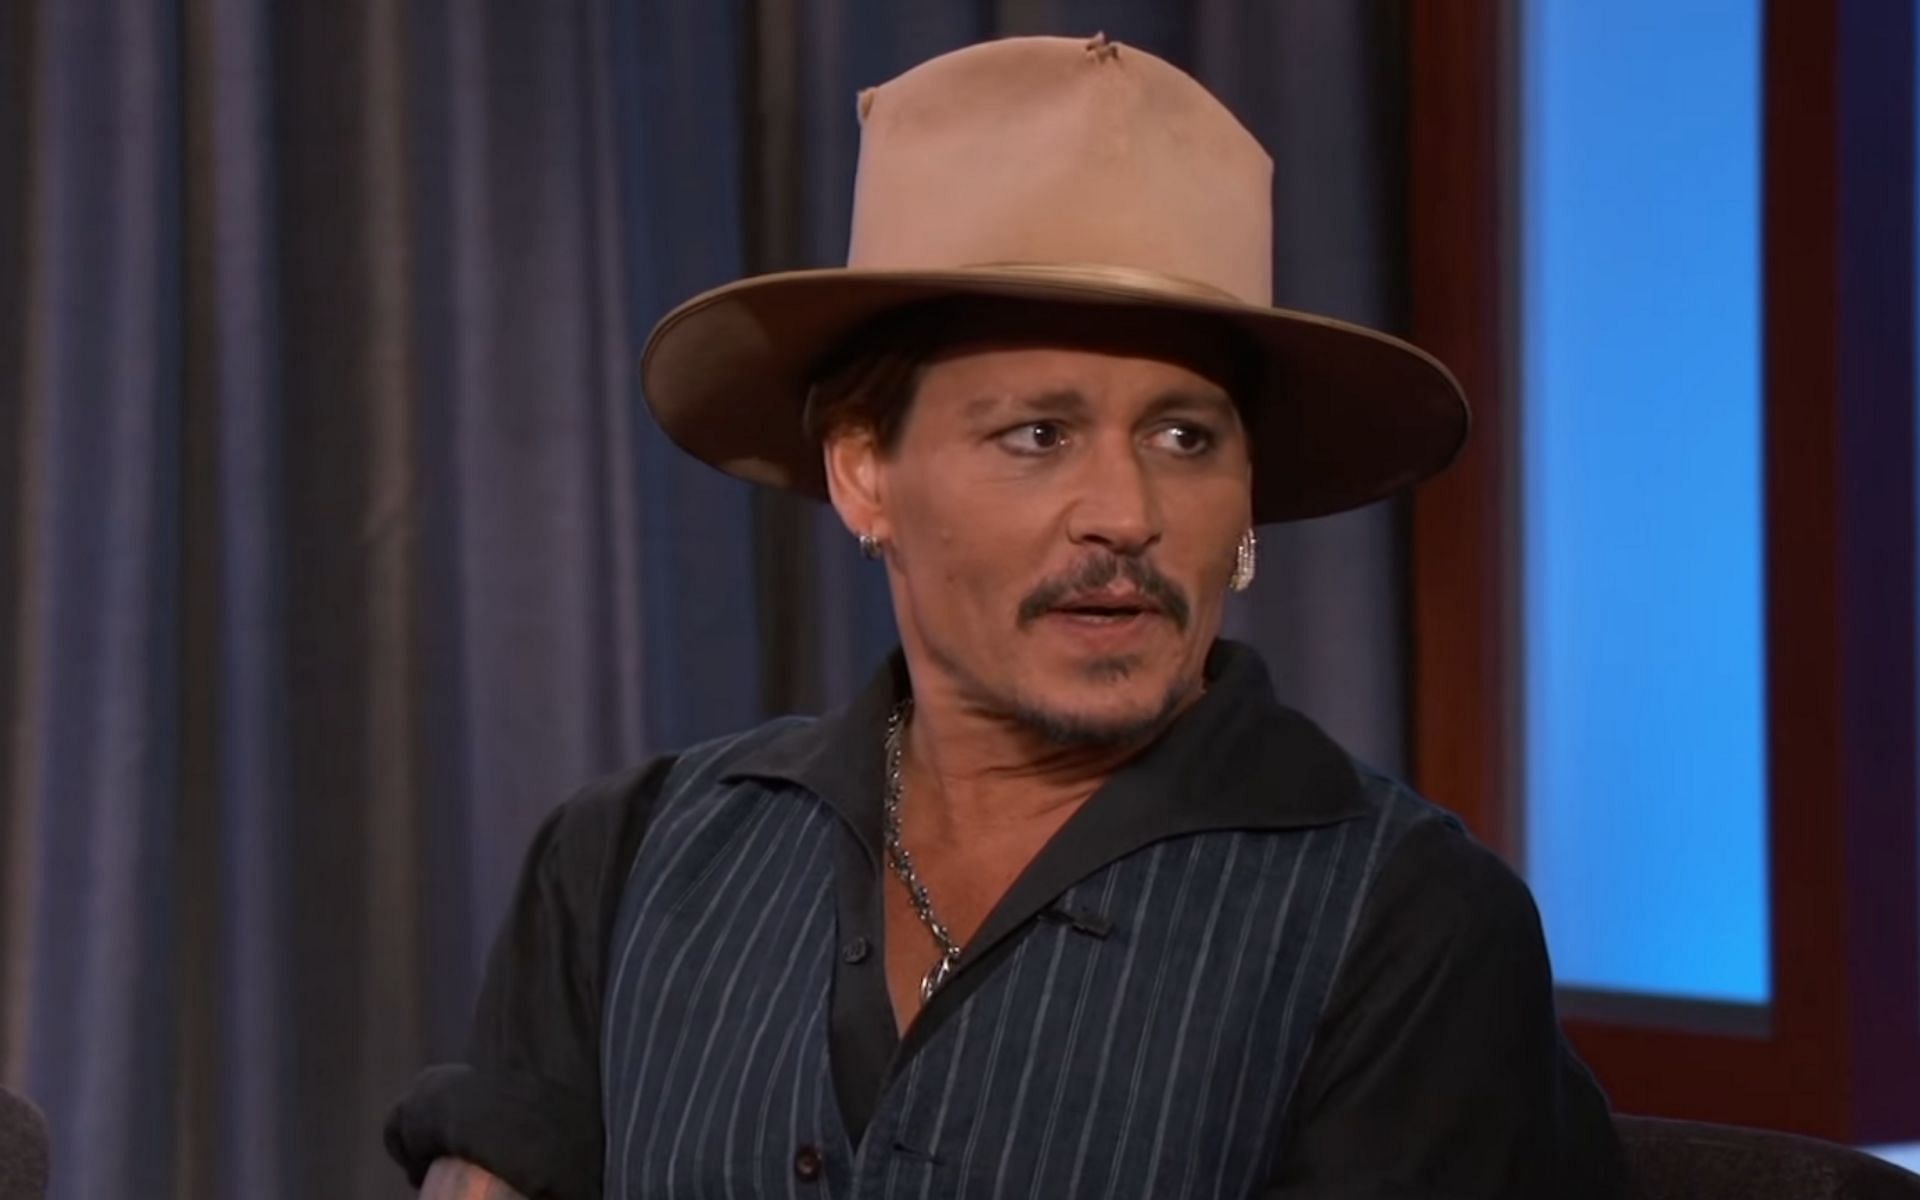 Depp came out victorious in his defamation case against ex-wife Amber Heard (Image via Jimmy Kimmel Live)